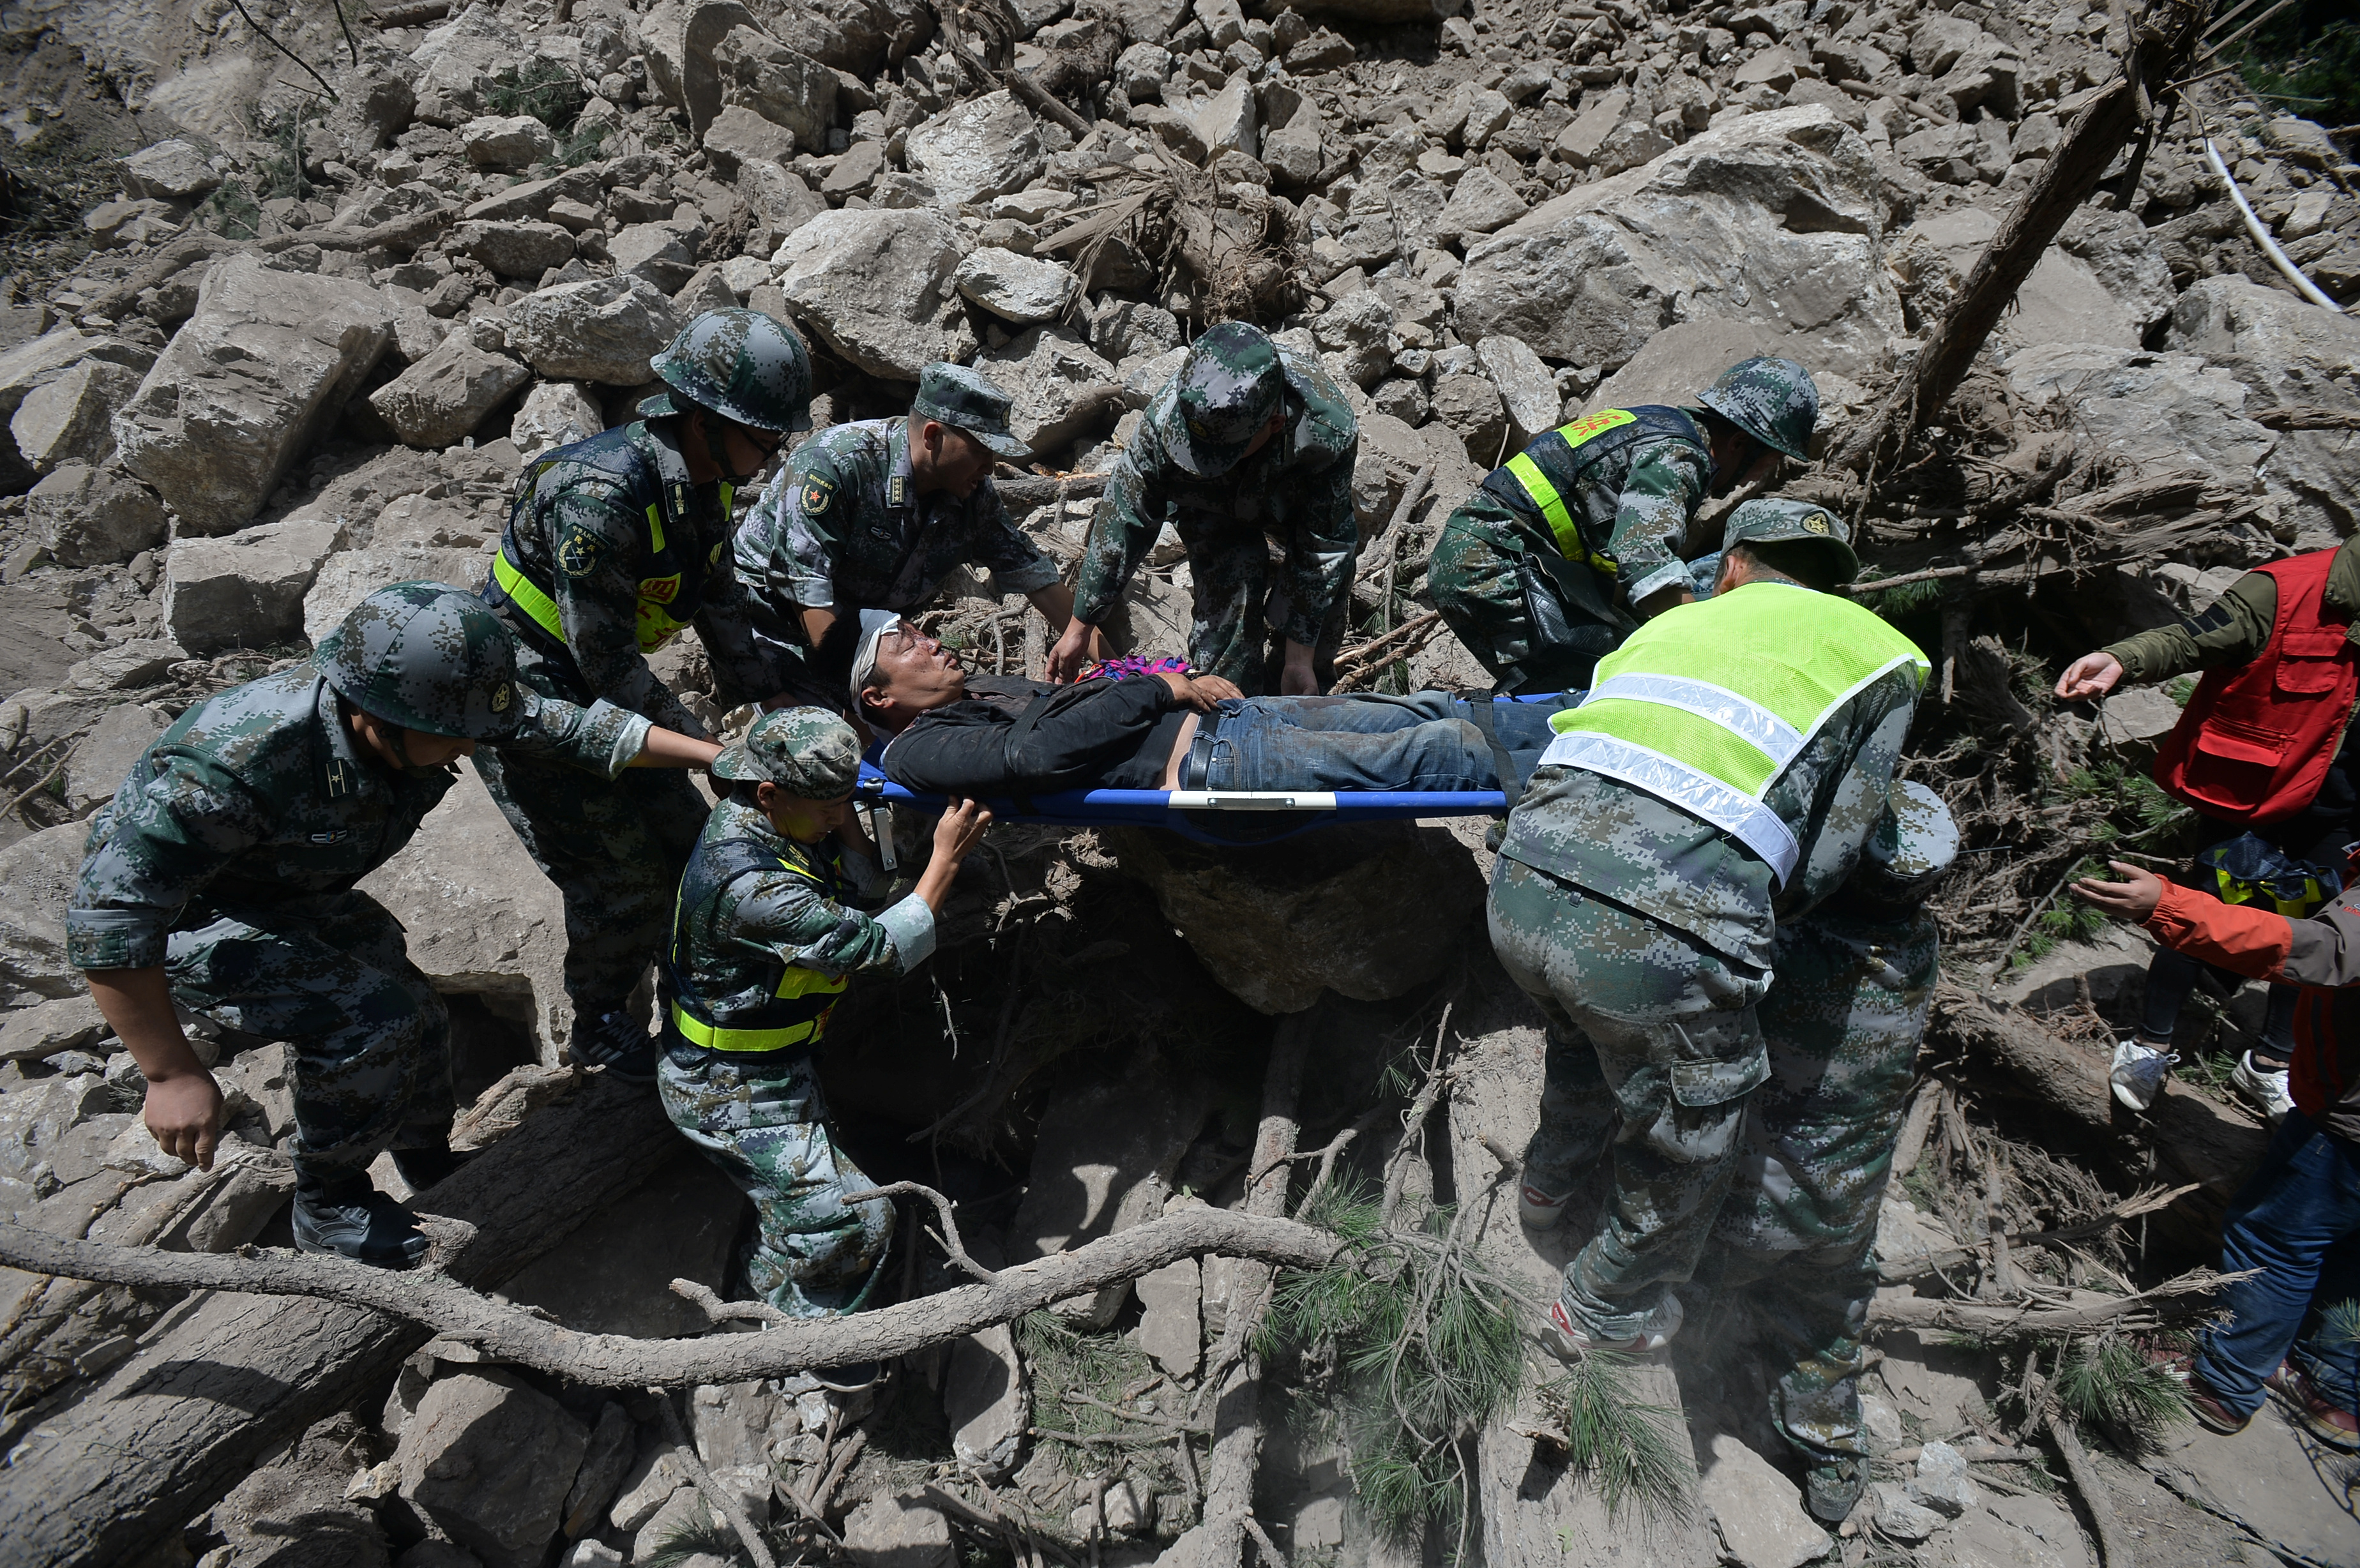 Chinese paramilitary police carry a survivor after an earthquake in Jiuzhaigou county, Ngawa prefecture, Sichuan province, China on Aug. 9, 2017. (China Stringer Network—Reuters)